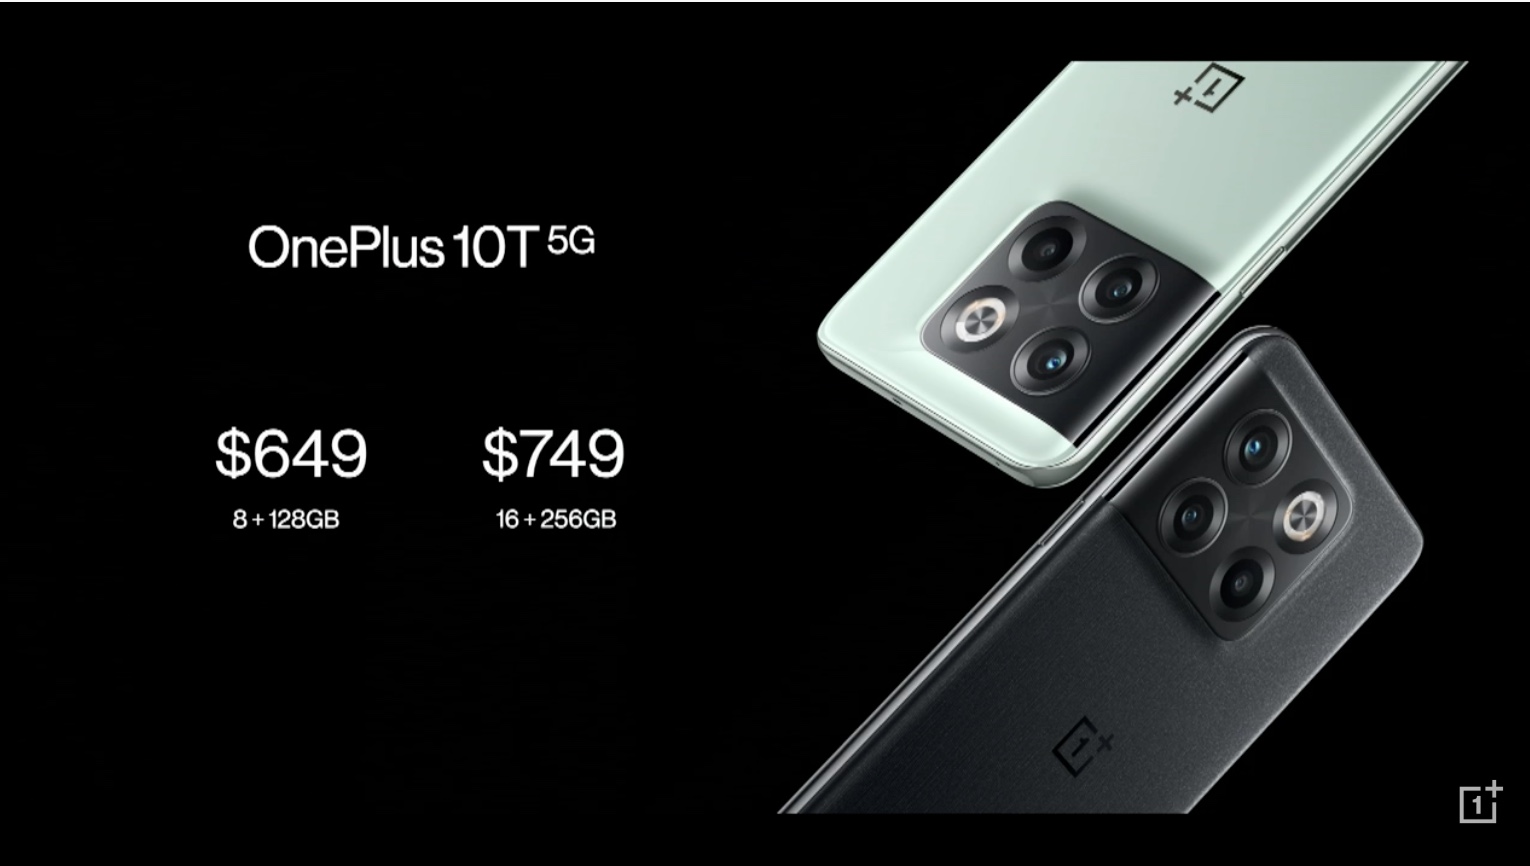 OnePlus 10T pricing